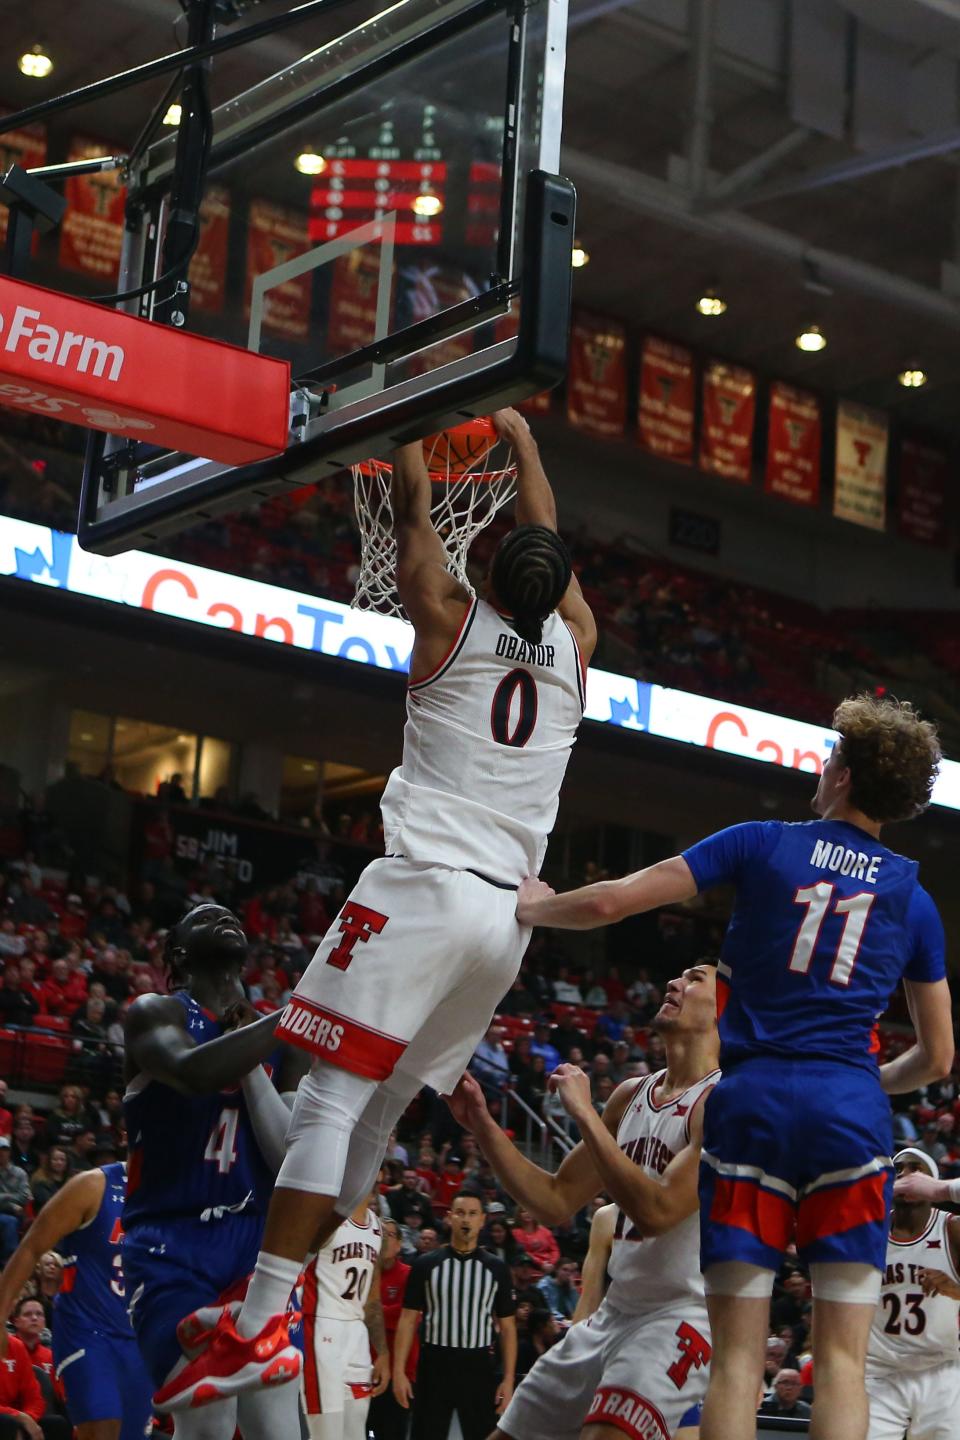 Texas Tech forward Kevin Obanor (0) dunks the ball against Houston Christian center Bonke Maring (4) and forward Tristan Moore (11) in the second half of a nonconference game Wednesday at United Supermarkets Arena. Obanor finished with 22 points and nine rebounds. [Michael C. Johnson-USA TODAY Sports]